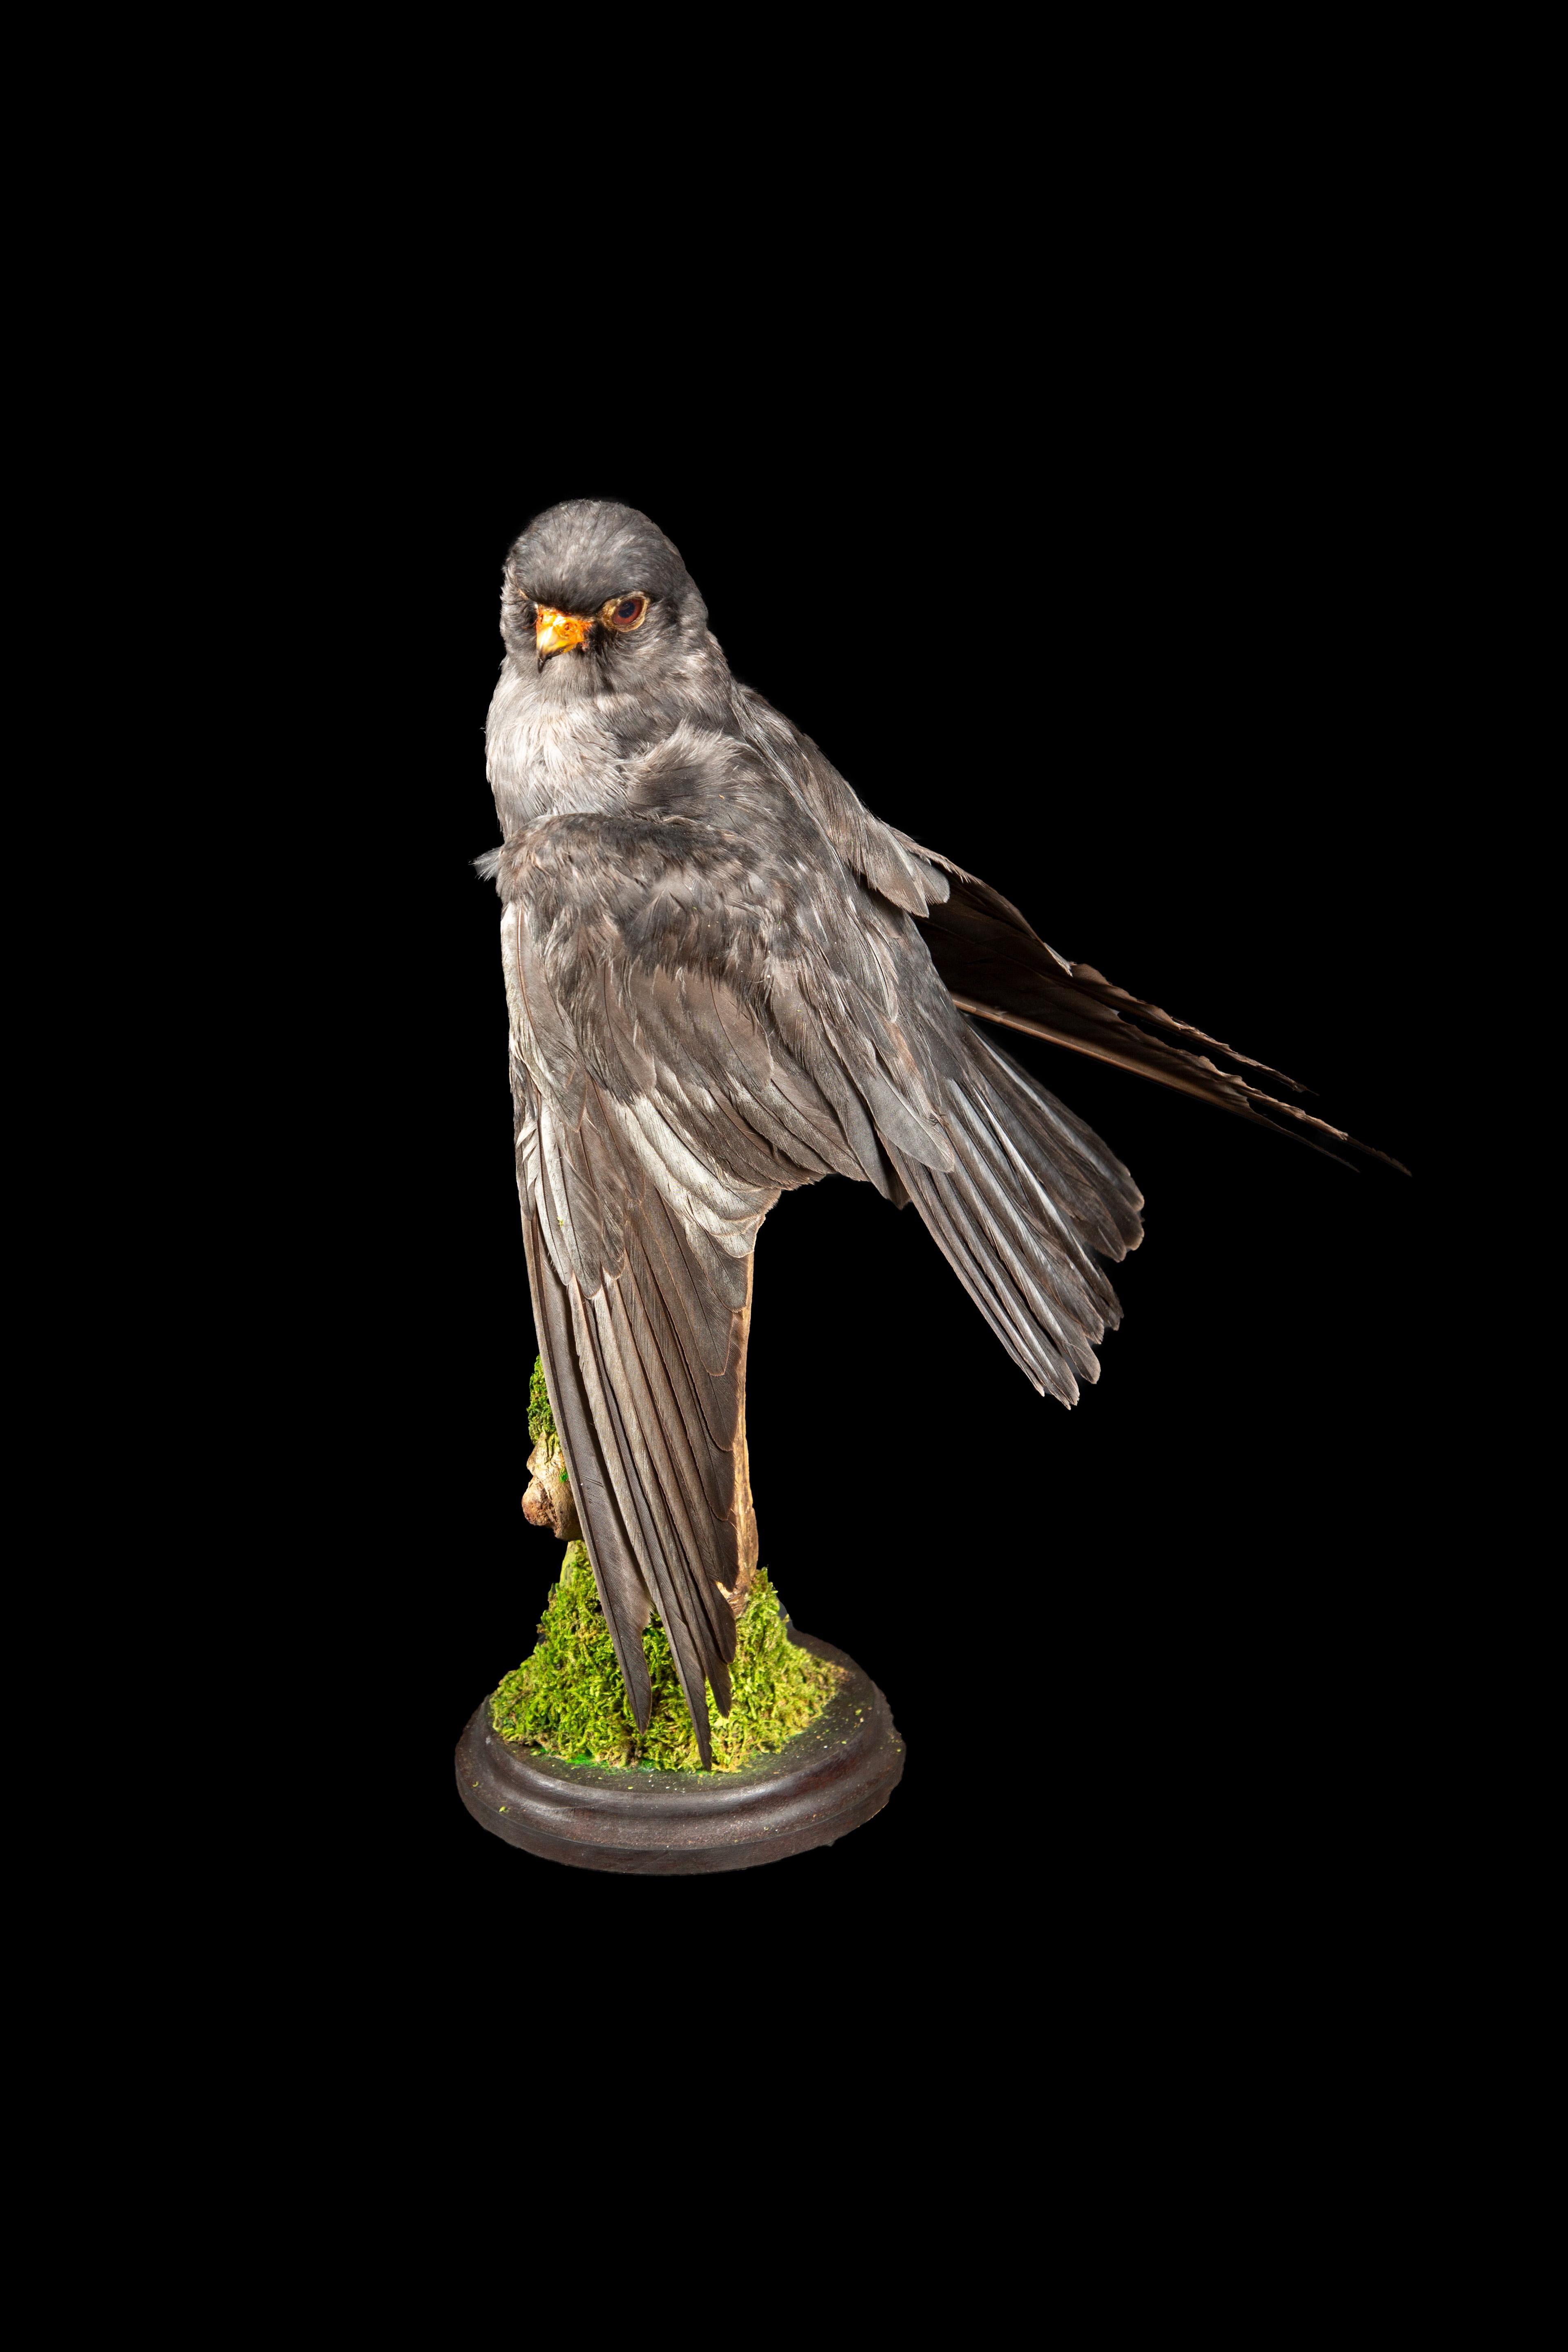 Captivating Taxidermy portrayal of the Lesser Kestrel (Falco naumanni), a diminutive falcon species renowned for its graceful flight and striking appearance. Found across a vast expanse from the Mediterranean to Central Asia, including regions